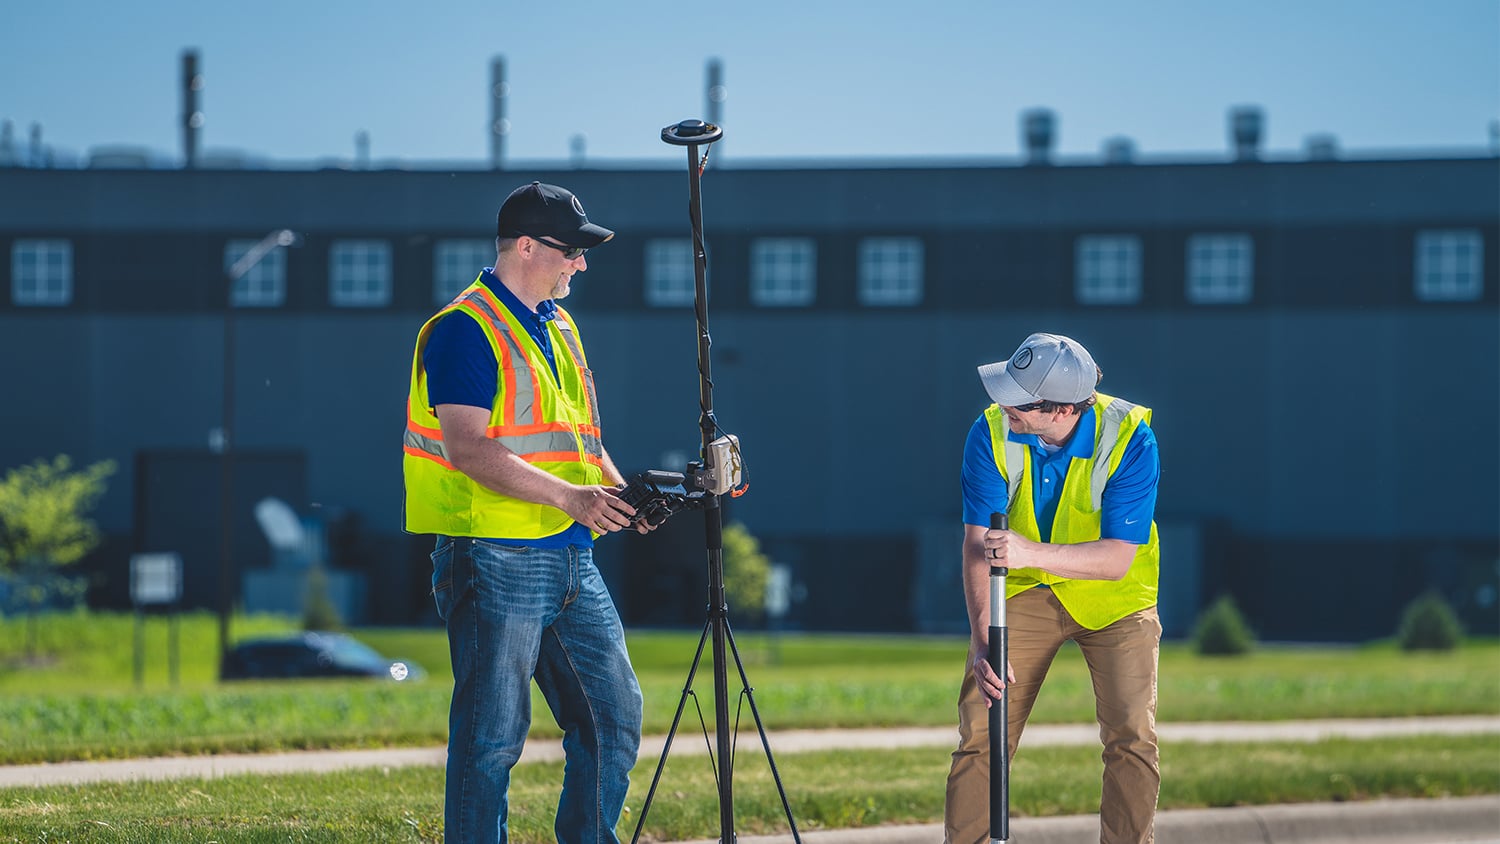 Consulting Firm Bolton and Menk uses the Arrow Gold GNSS Receiver for High Accuracy GIS Data Collection